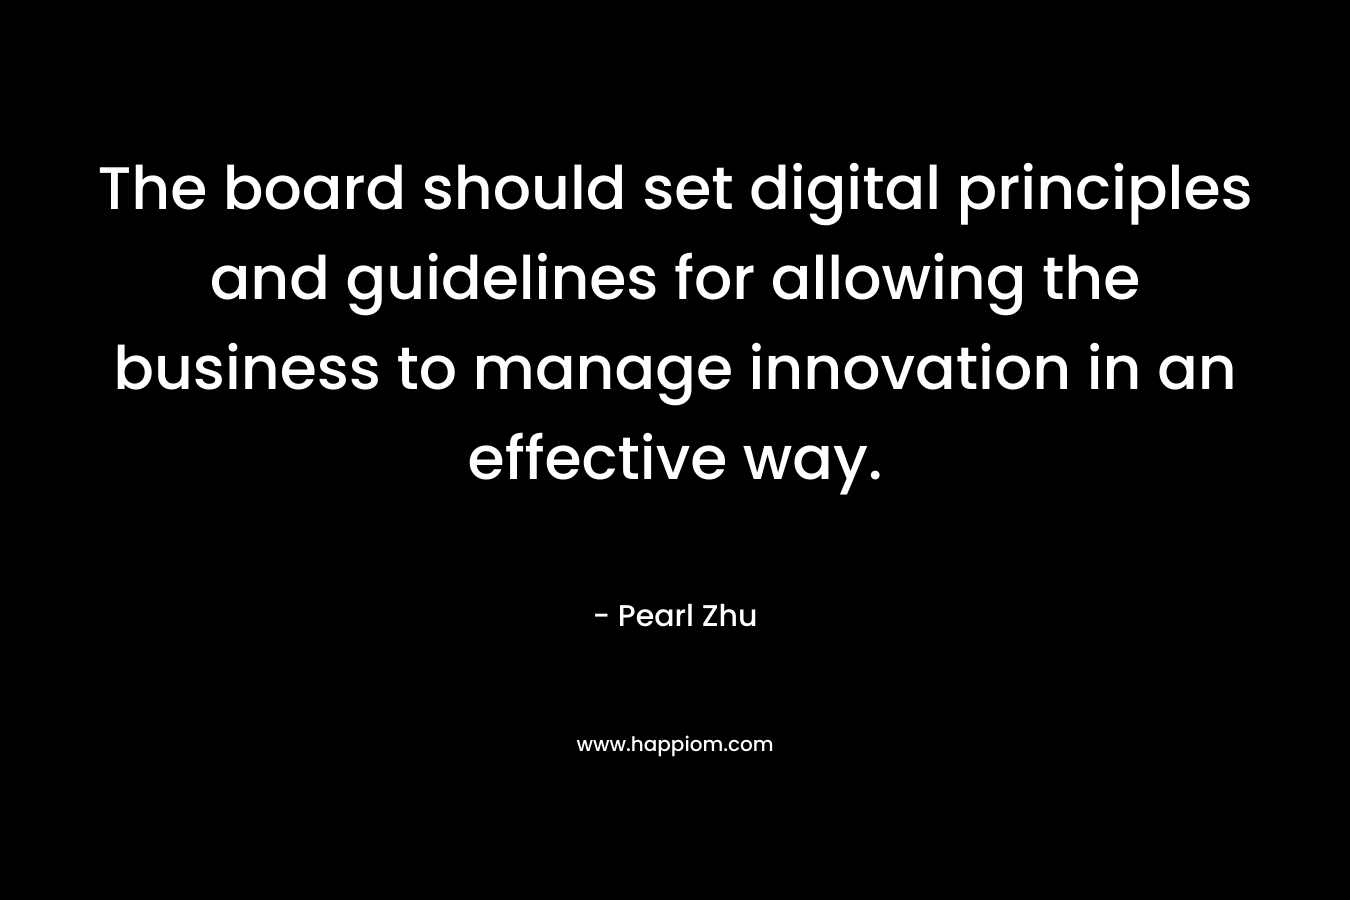 The board should set digital principles and guidelines for allowing the business to manage innovation in an effective way. – Pearl Zhu